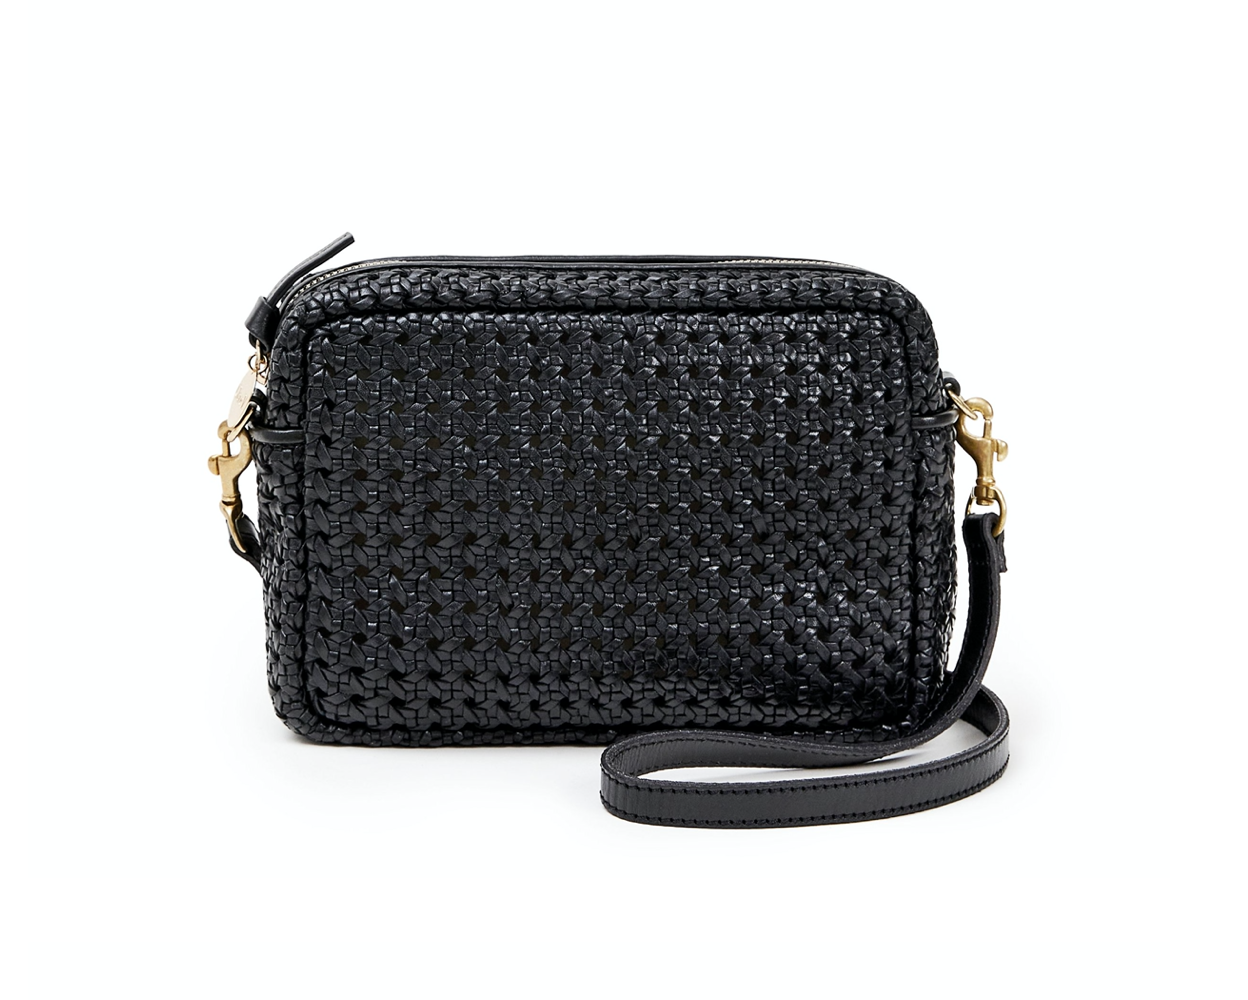 Clare V. Midi Sac Woven Leather Crossbody Bag in Black/Natural Woven Checker  at Nordstrom - Yahoo Shopping